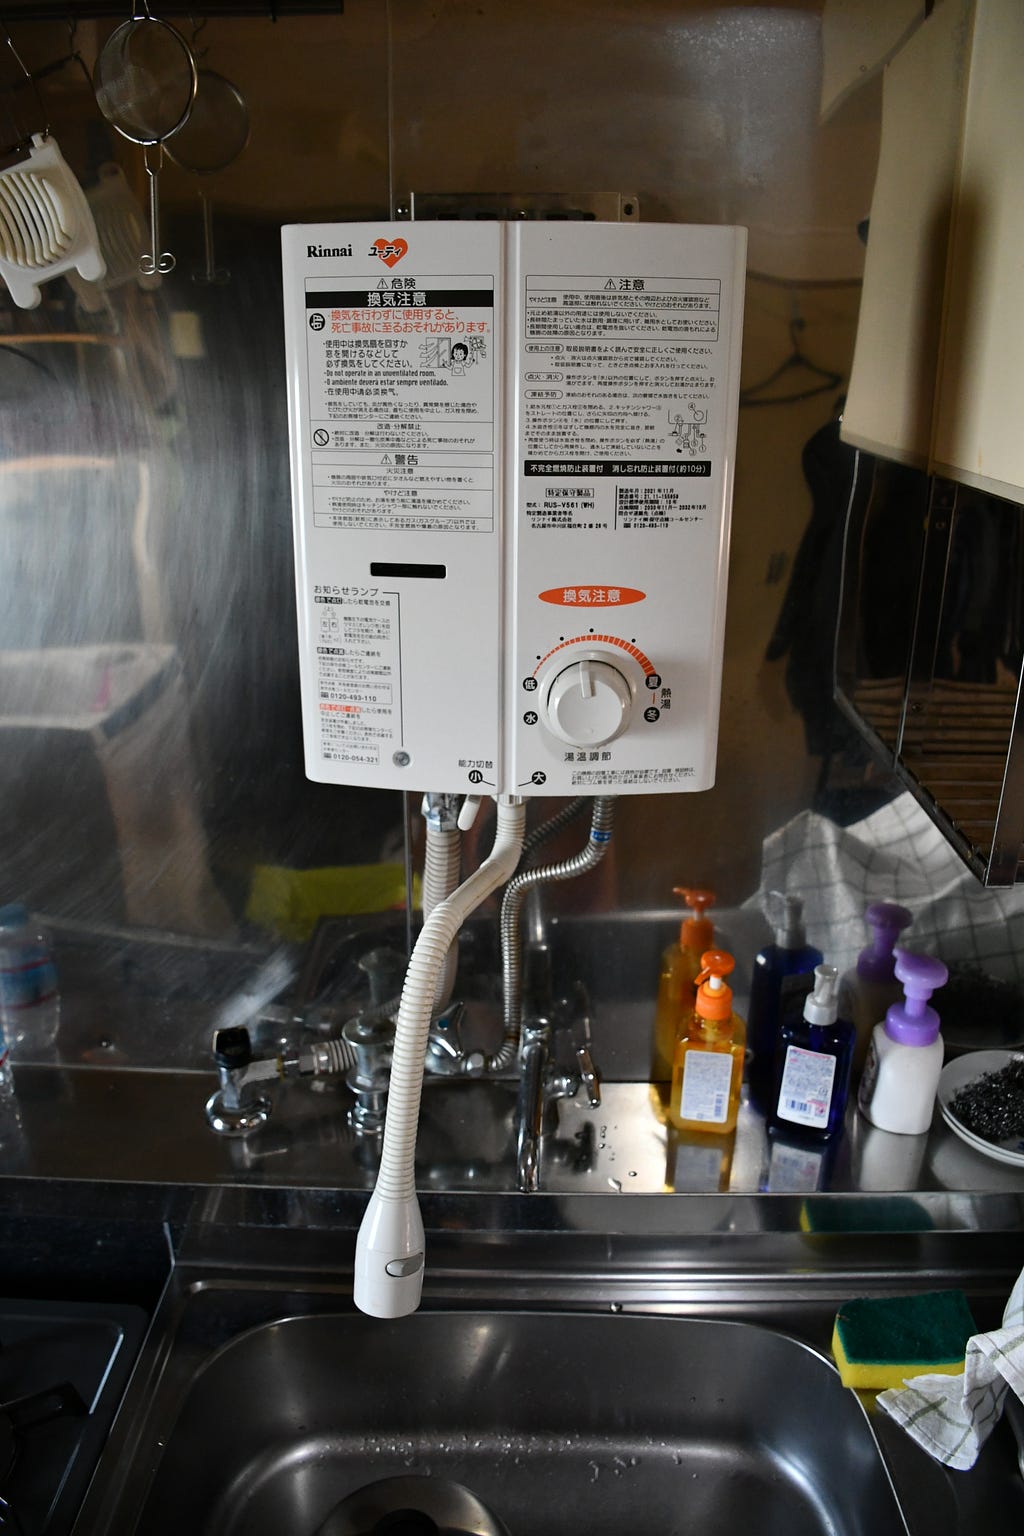 A tankless water heater mounted over the kitchen sink in Japan